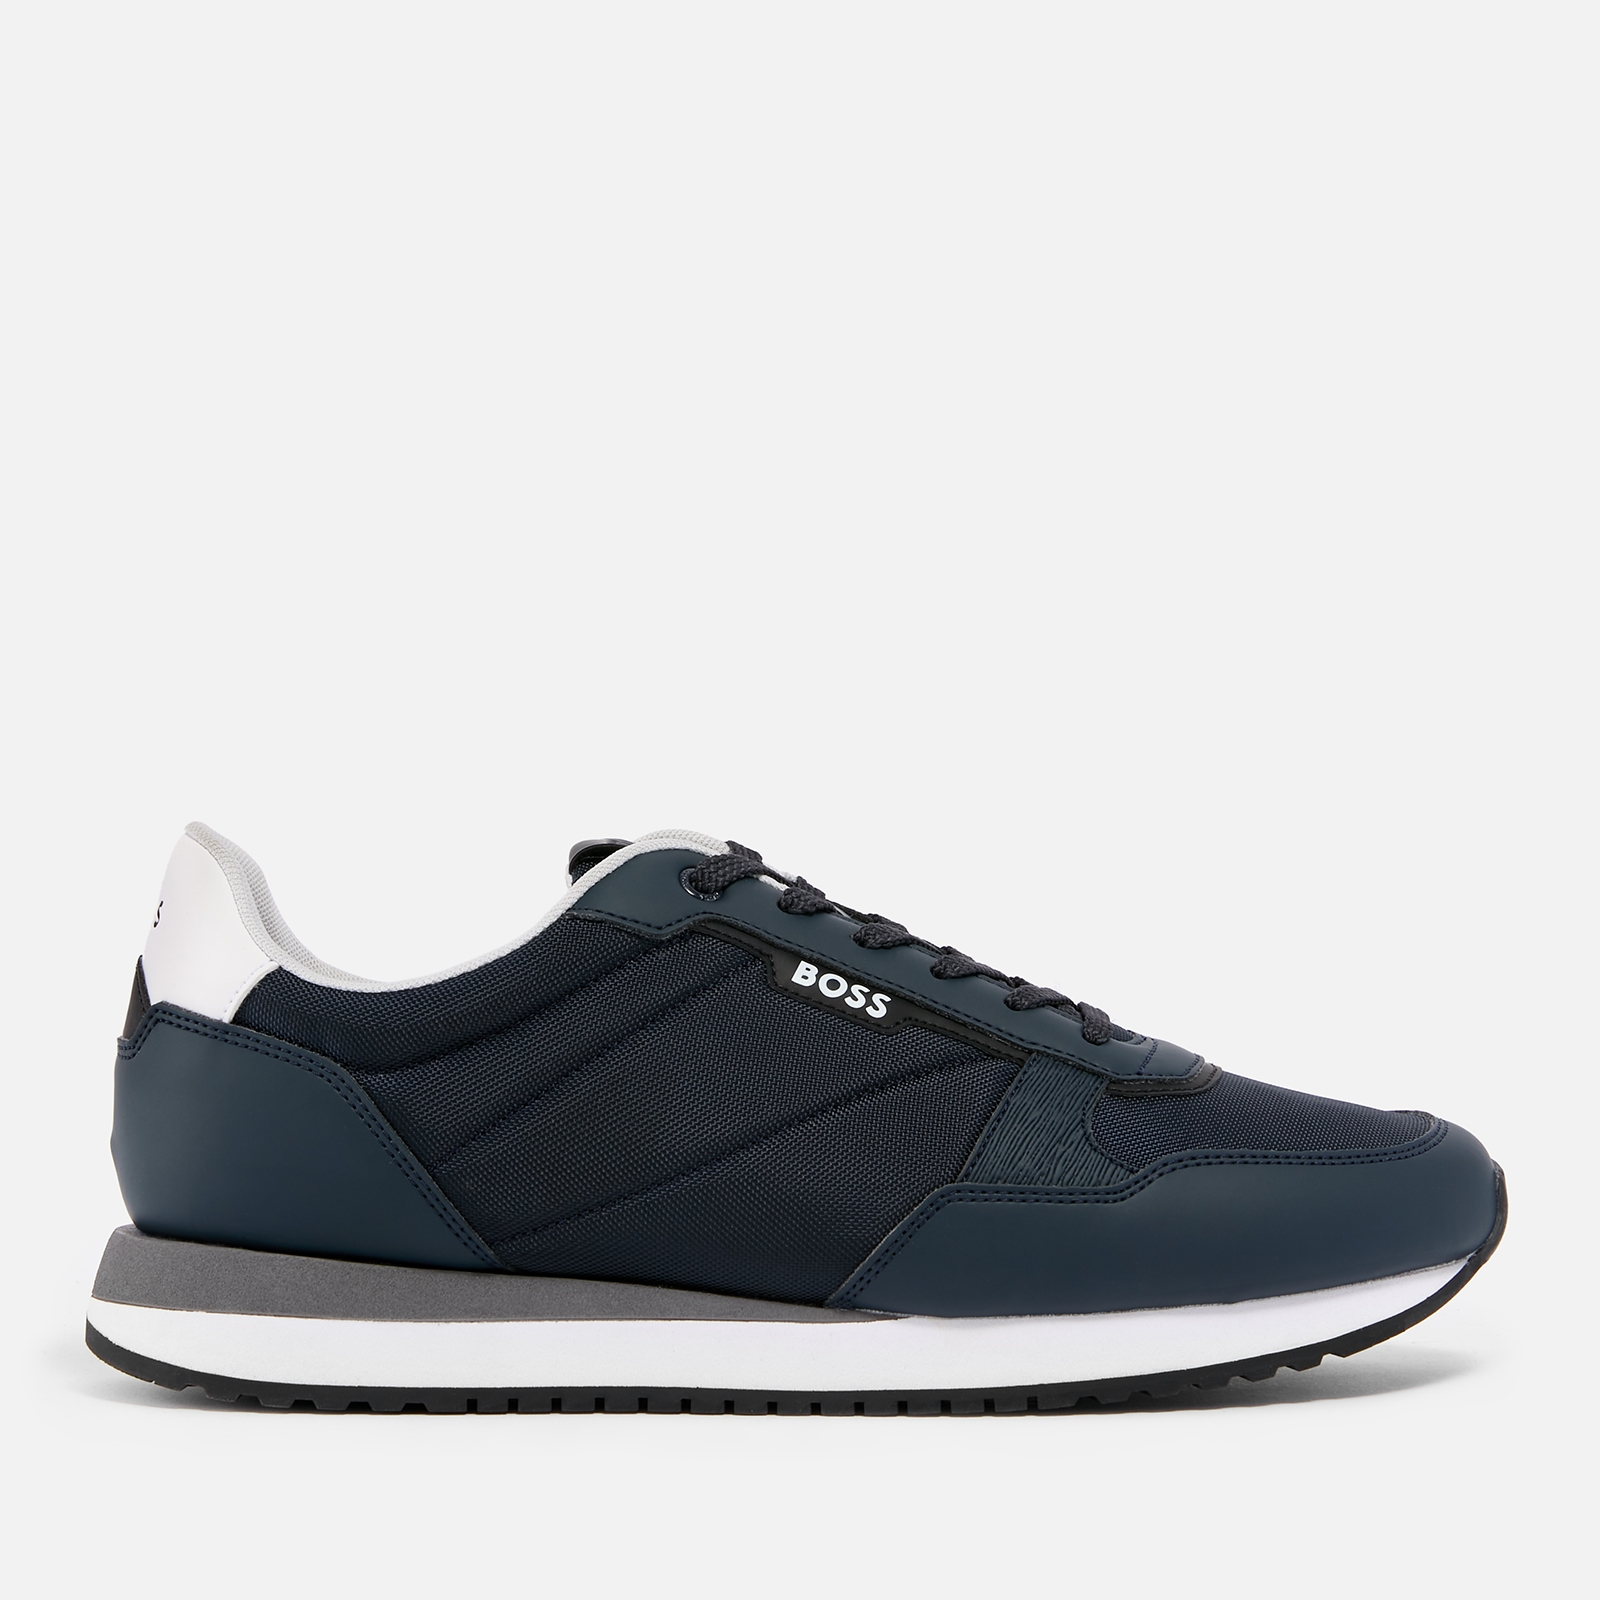 BOSS Men’s Kai Canvas and Faux Leather Runner Trainers